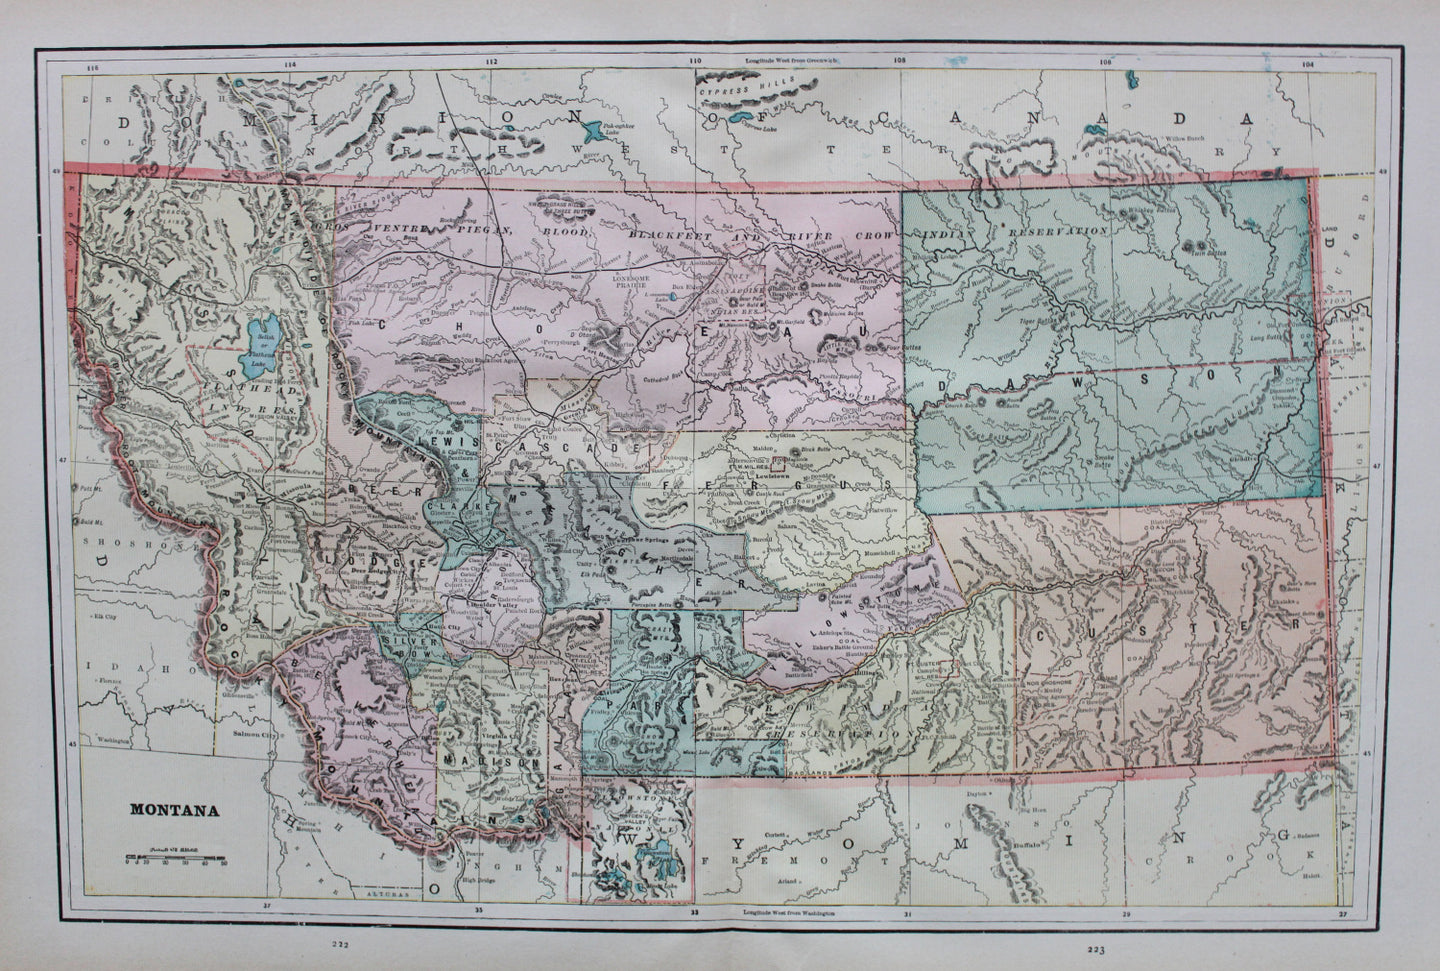 Antique-Printed-Color-Map-Montana-verso-Nevada-Wyoming-**********-United-States-West-1894-Cram-Maps-Of-Antiquity